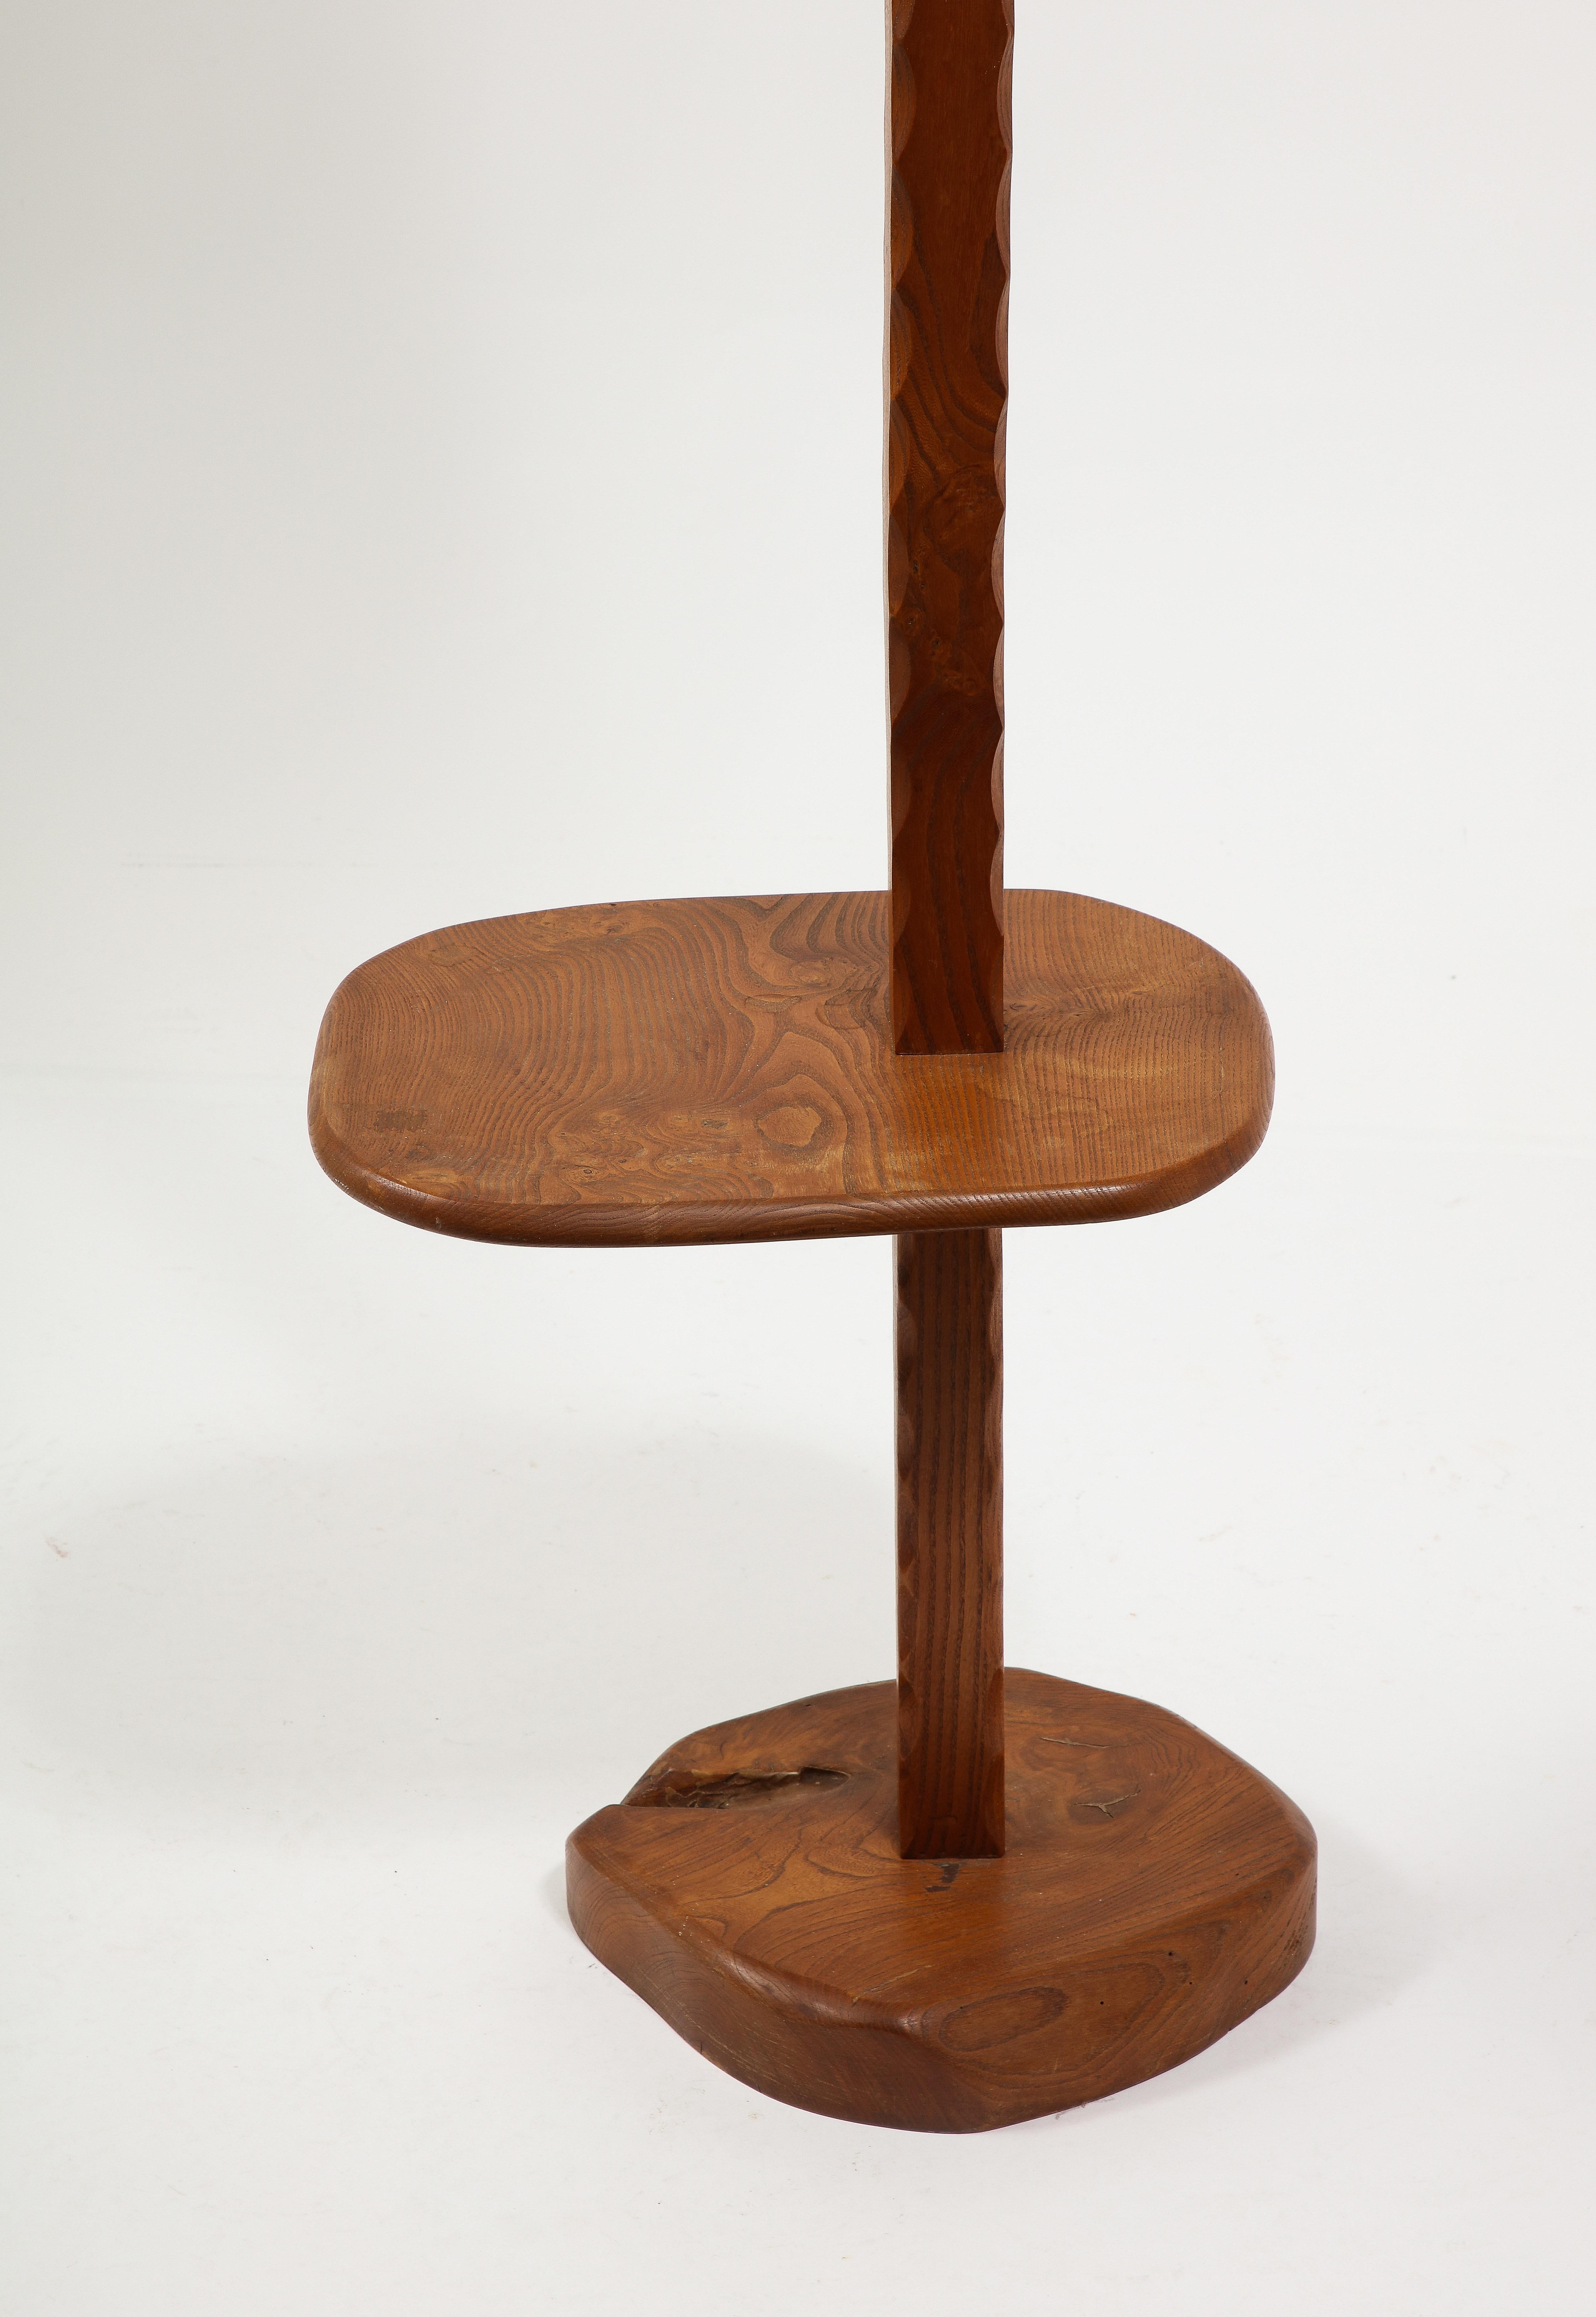 Solid Elm Floor Lamp With Shelf, France 1950's For Sale 9